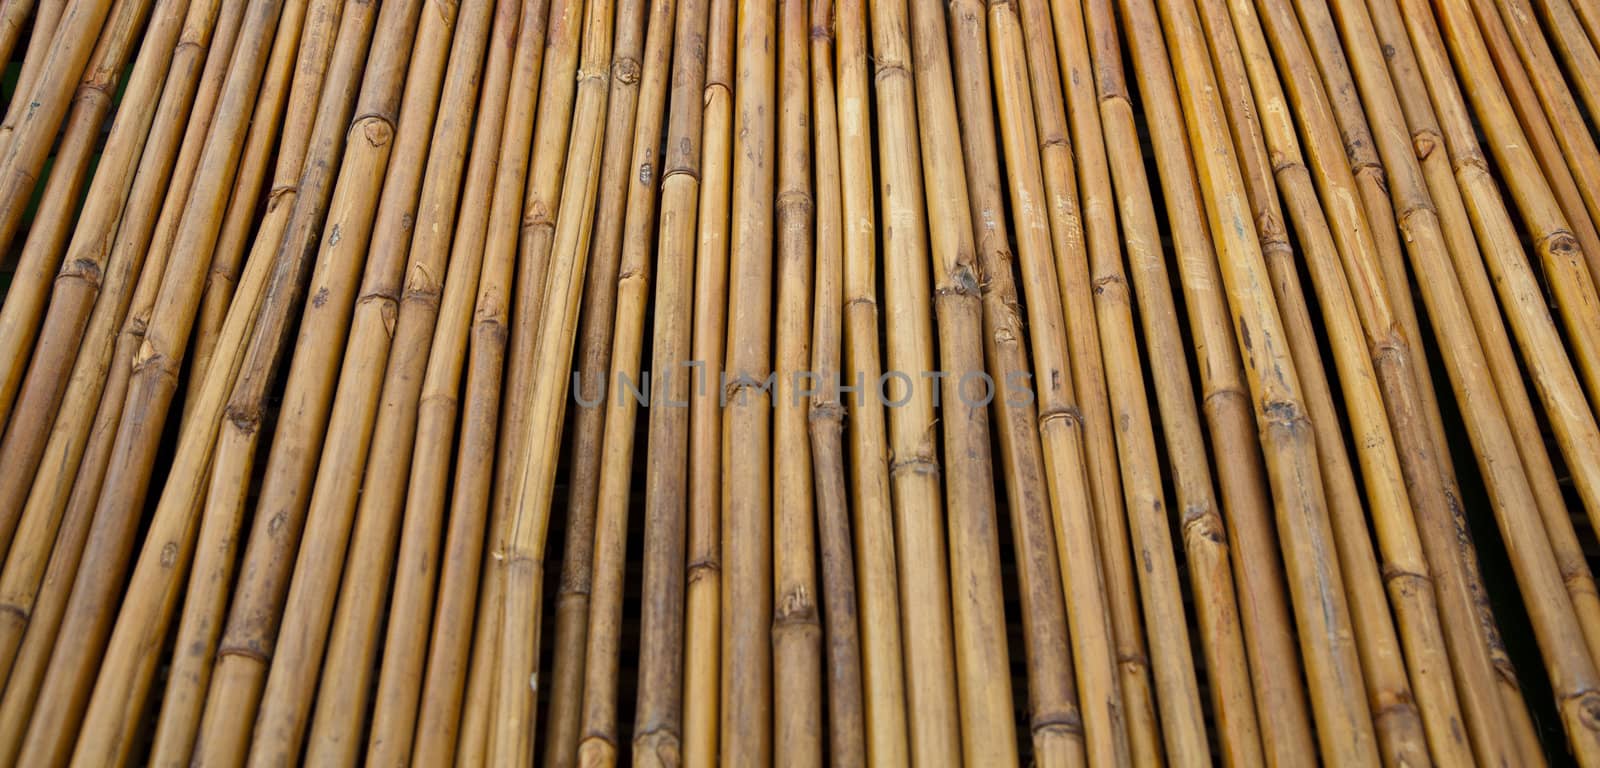 Yellow little bamboo trunks were in line by nails and arranged in fencing form.